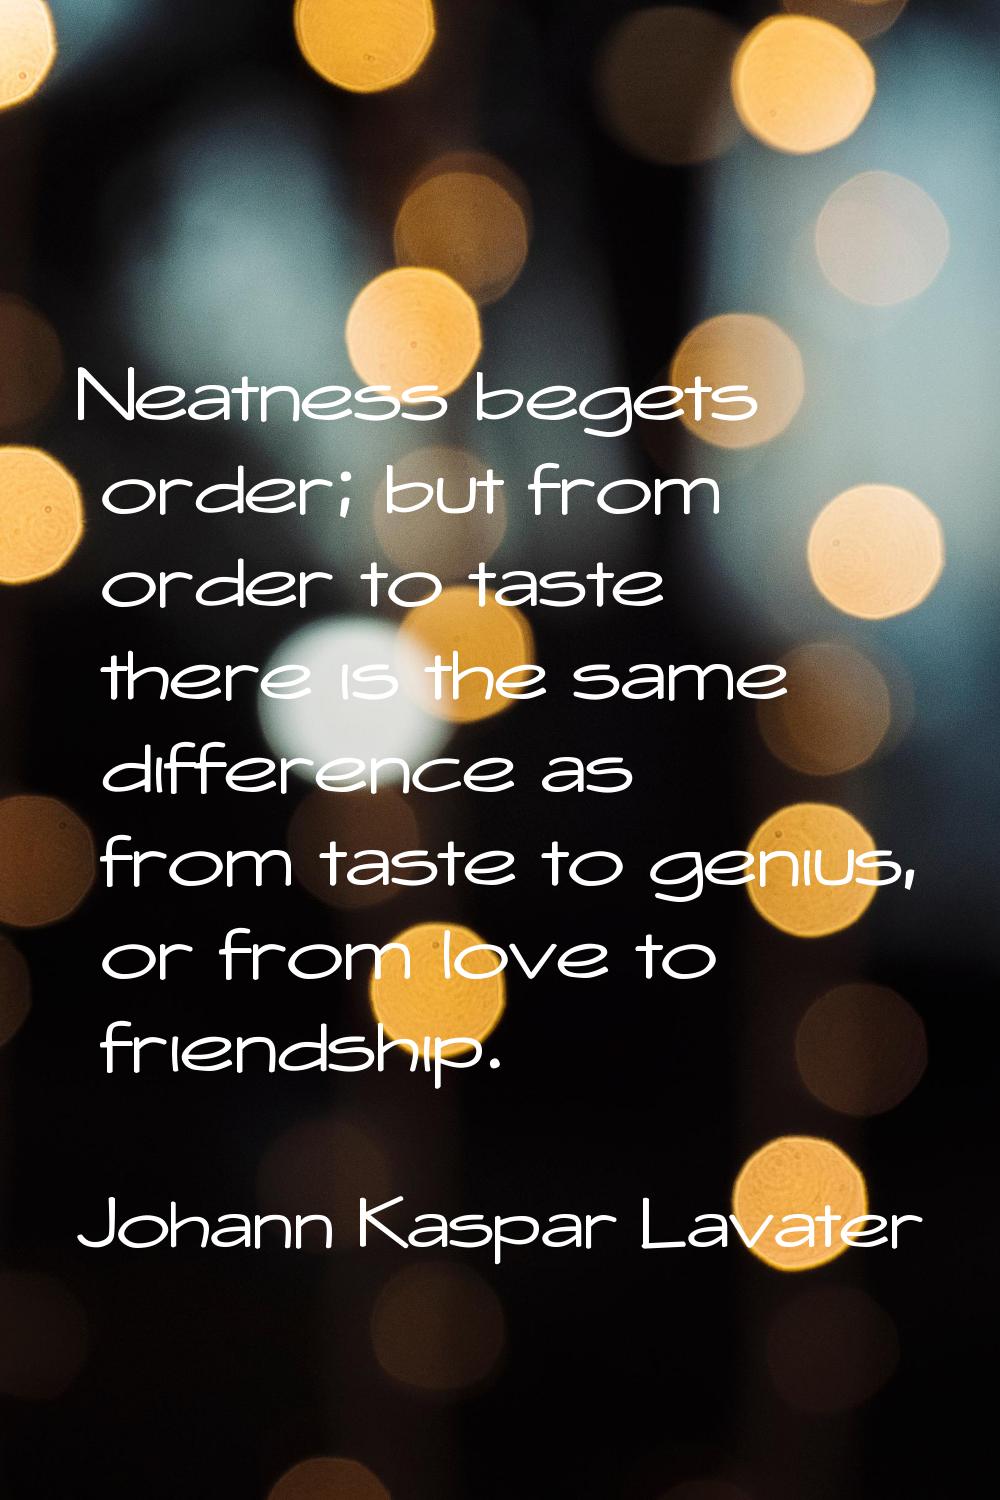 Neatness begets order; but from order to taste there is the same difference as from taste to genius